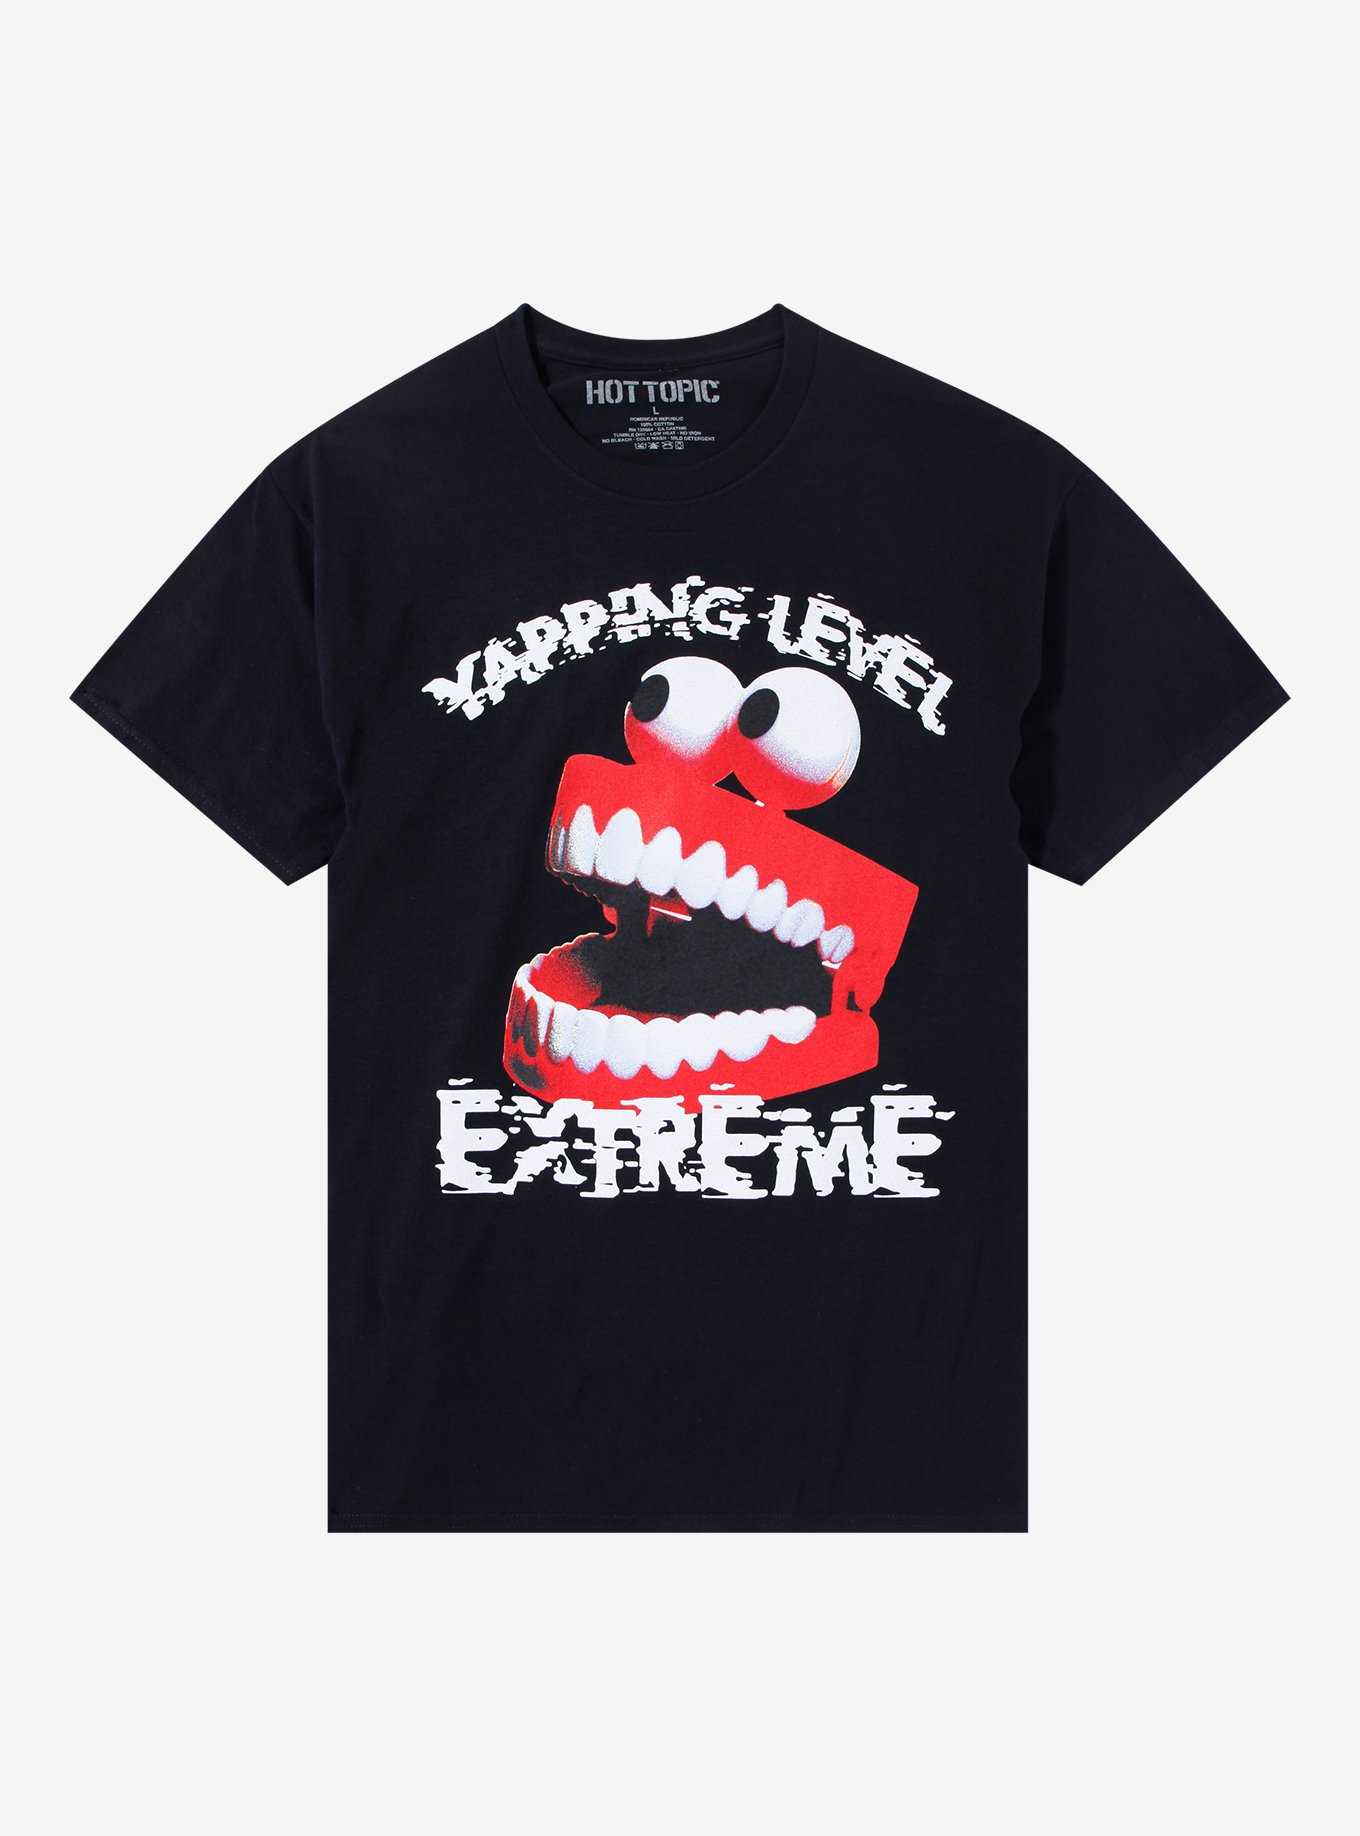 Yapping Level Extreme Chatter Teeth T-Shirt, , hi-res